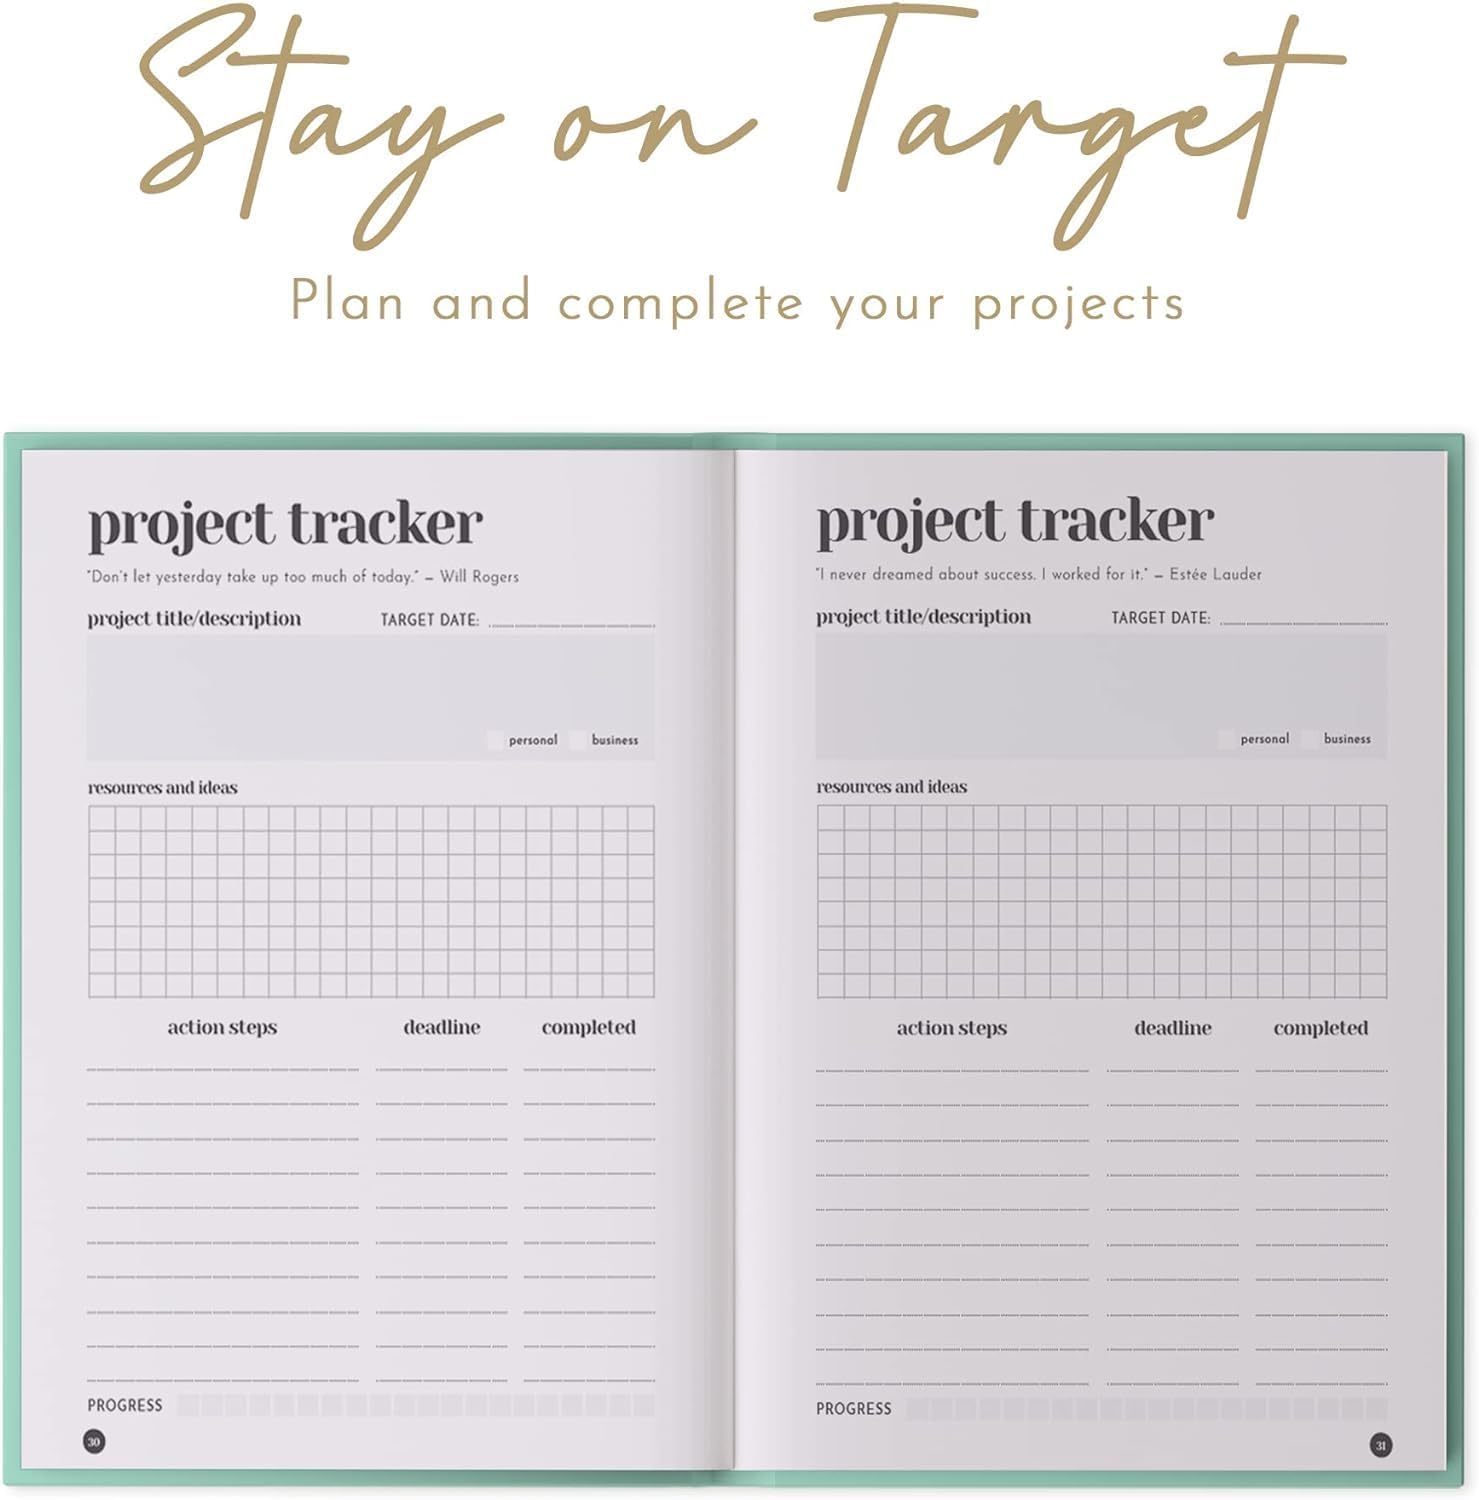 ADHD Planner for Adults: Focus and Productivity Planner - A planner for Neurodivergent Brains - Organization, Goal-Setting, and Time Management - Gift for Men and Women with ADHD